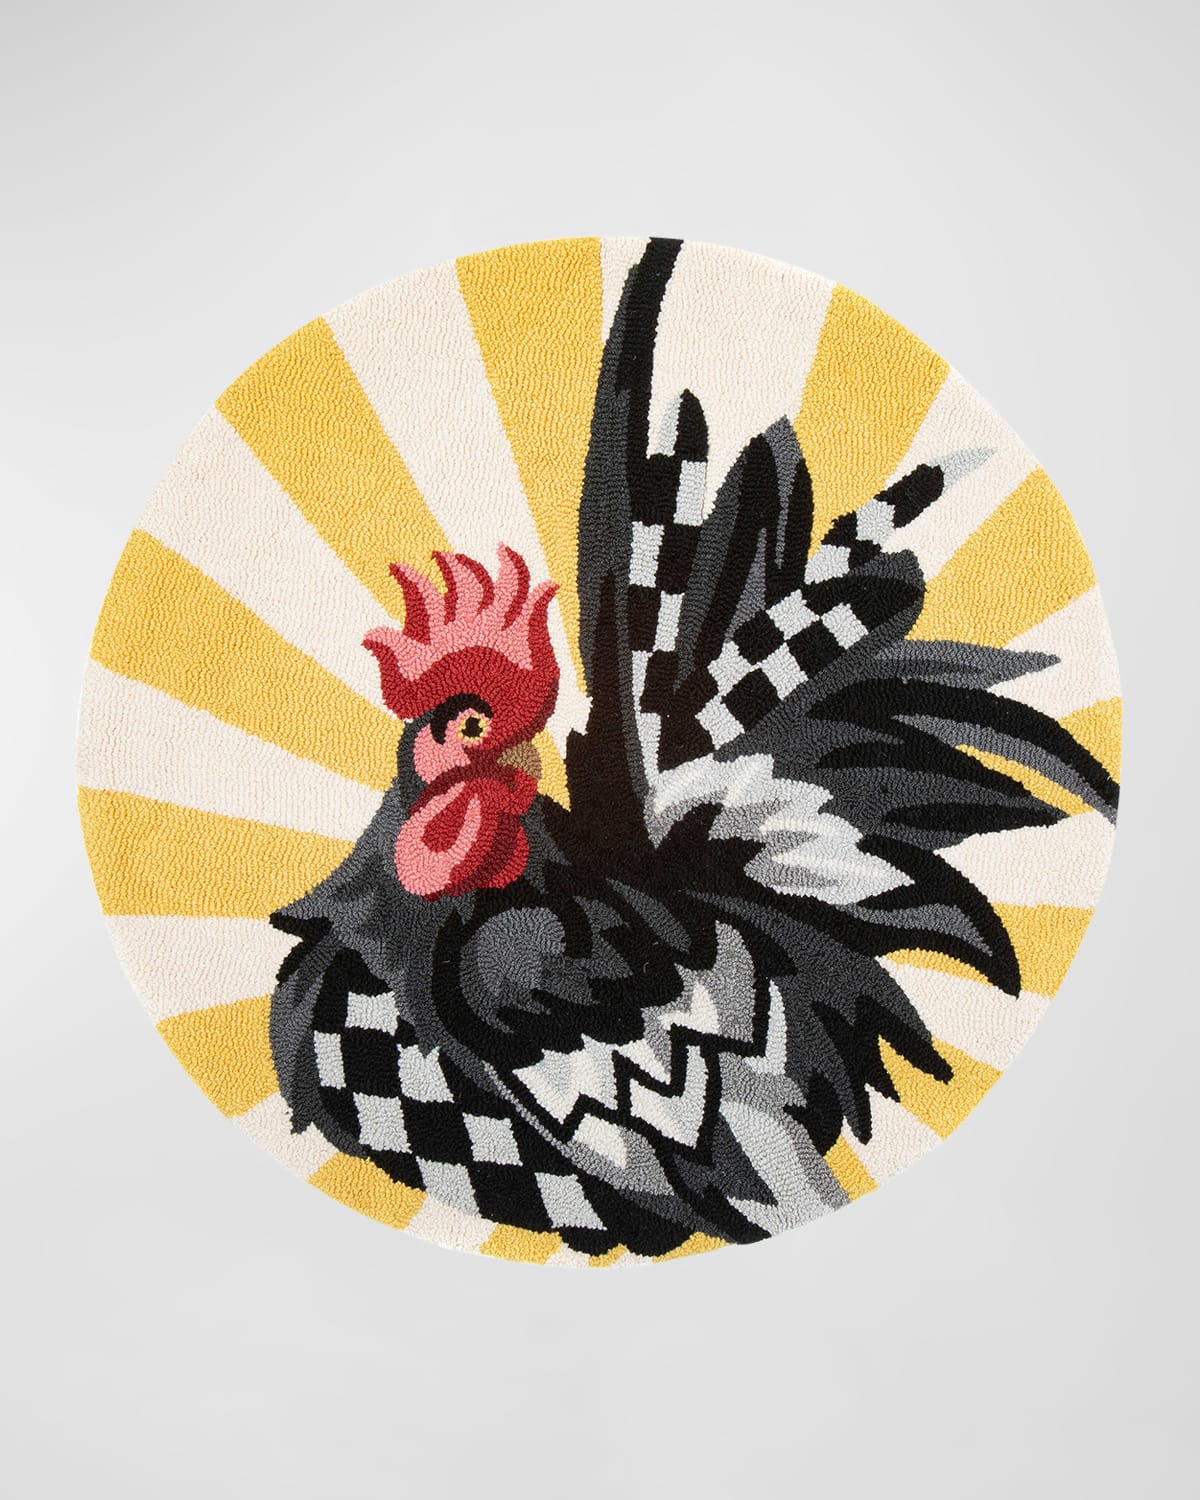 Sunrise Rooster Rug - 3' Round